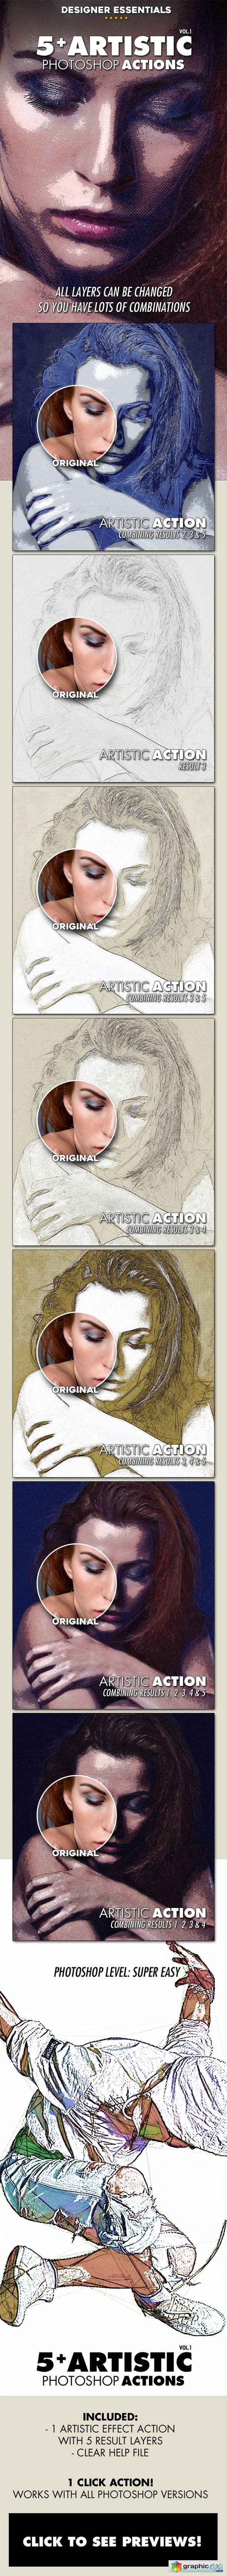 5 Artistic Effect Actions